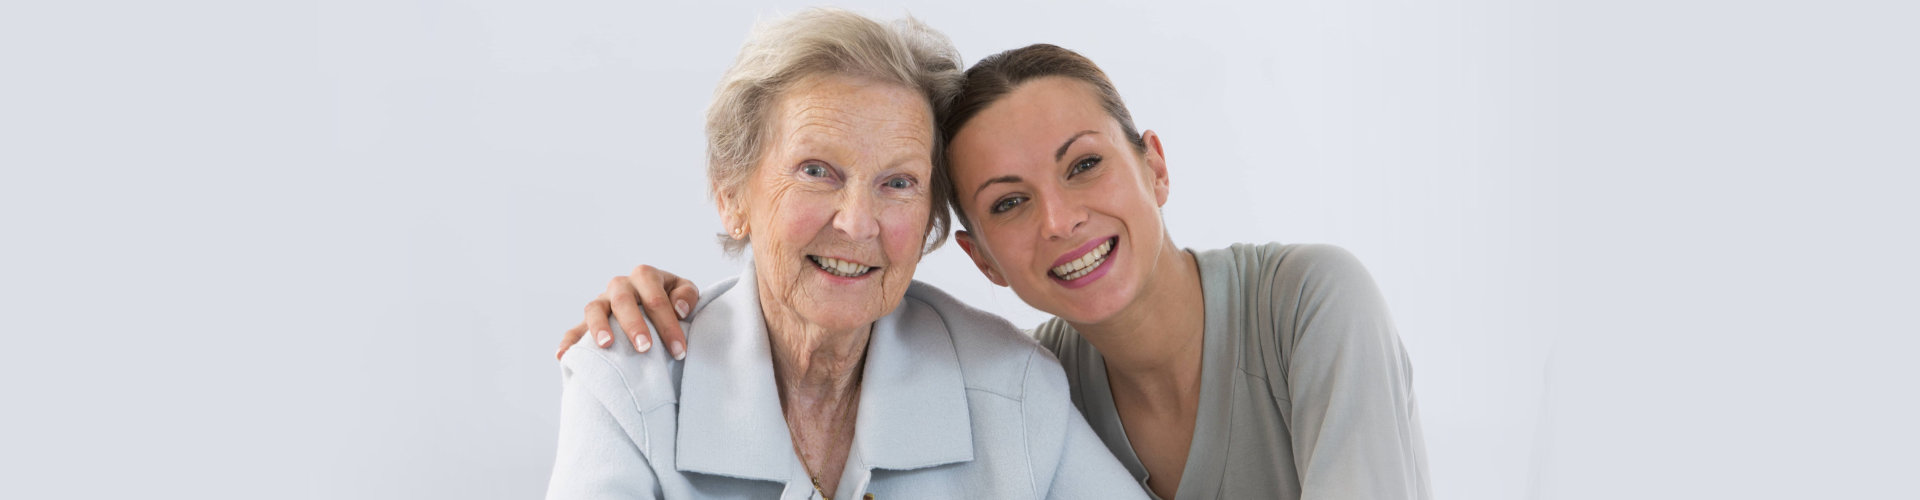 smiling female caregiver and her old blonded hair woman